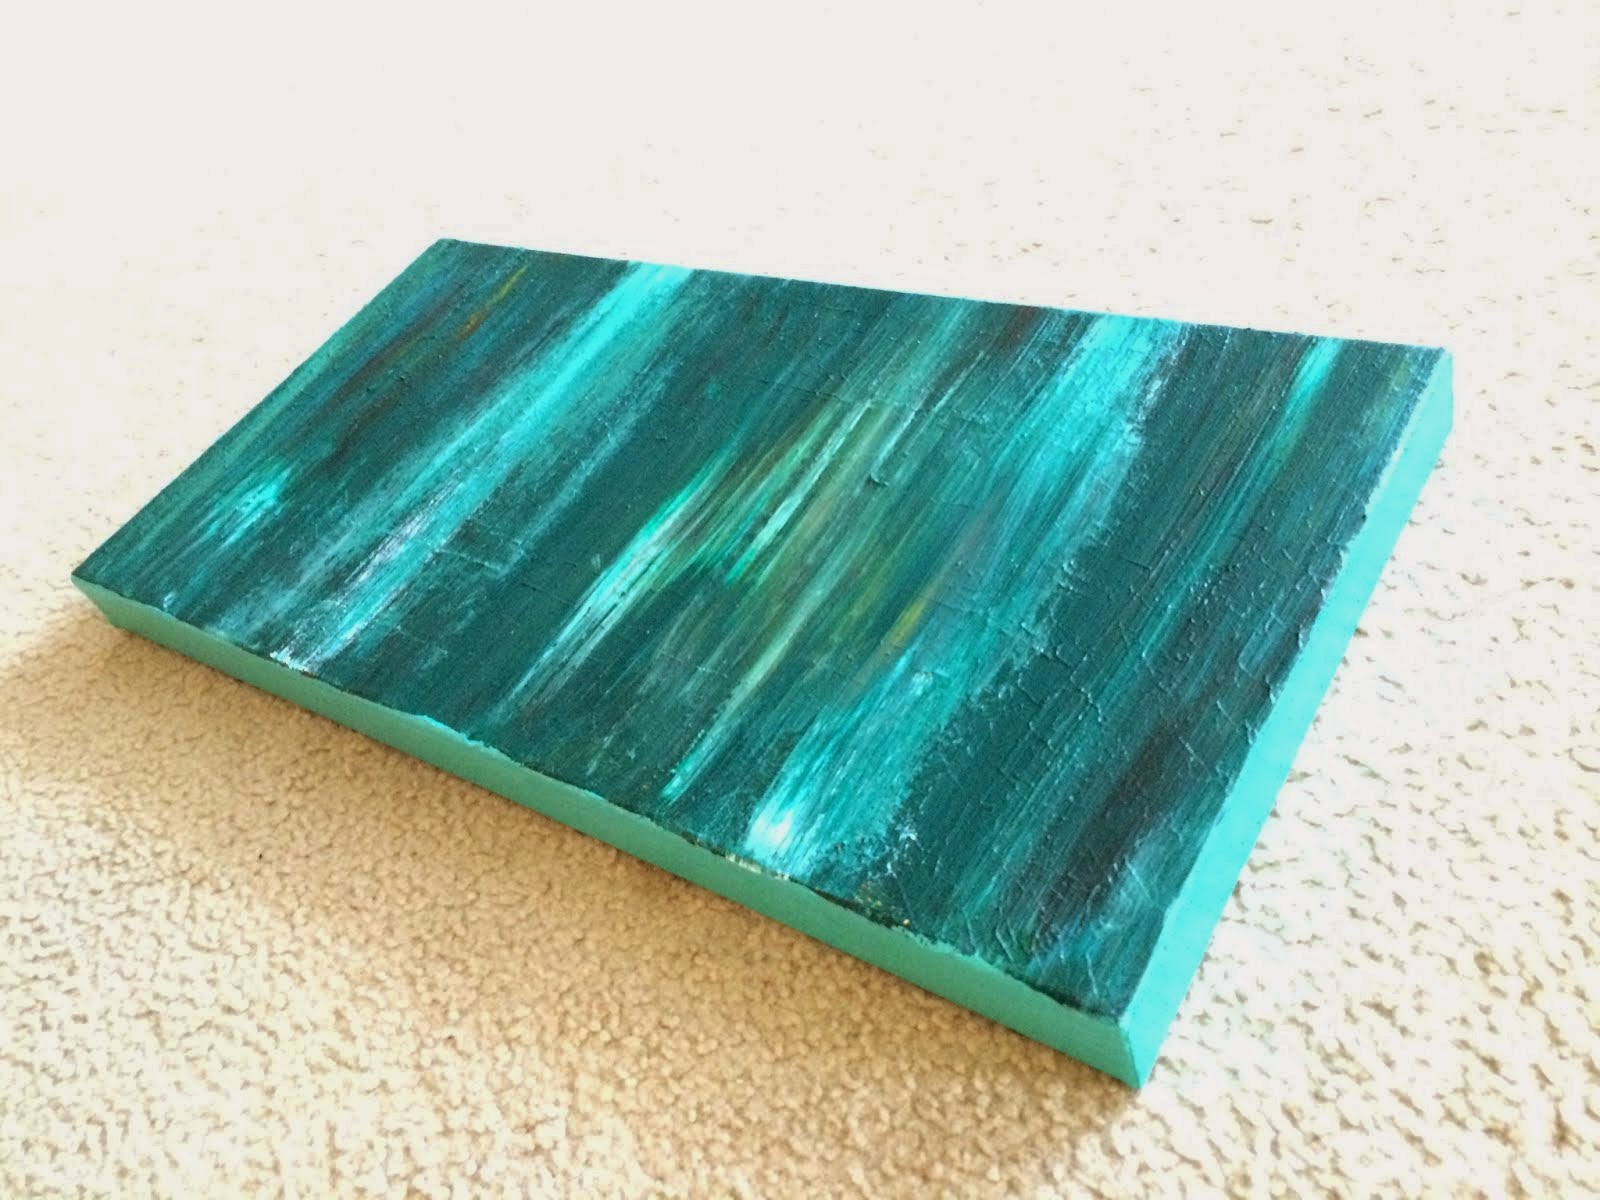 Abstract Turquoise